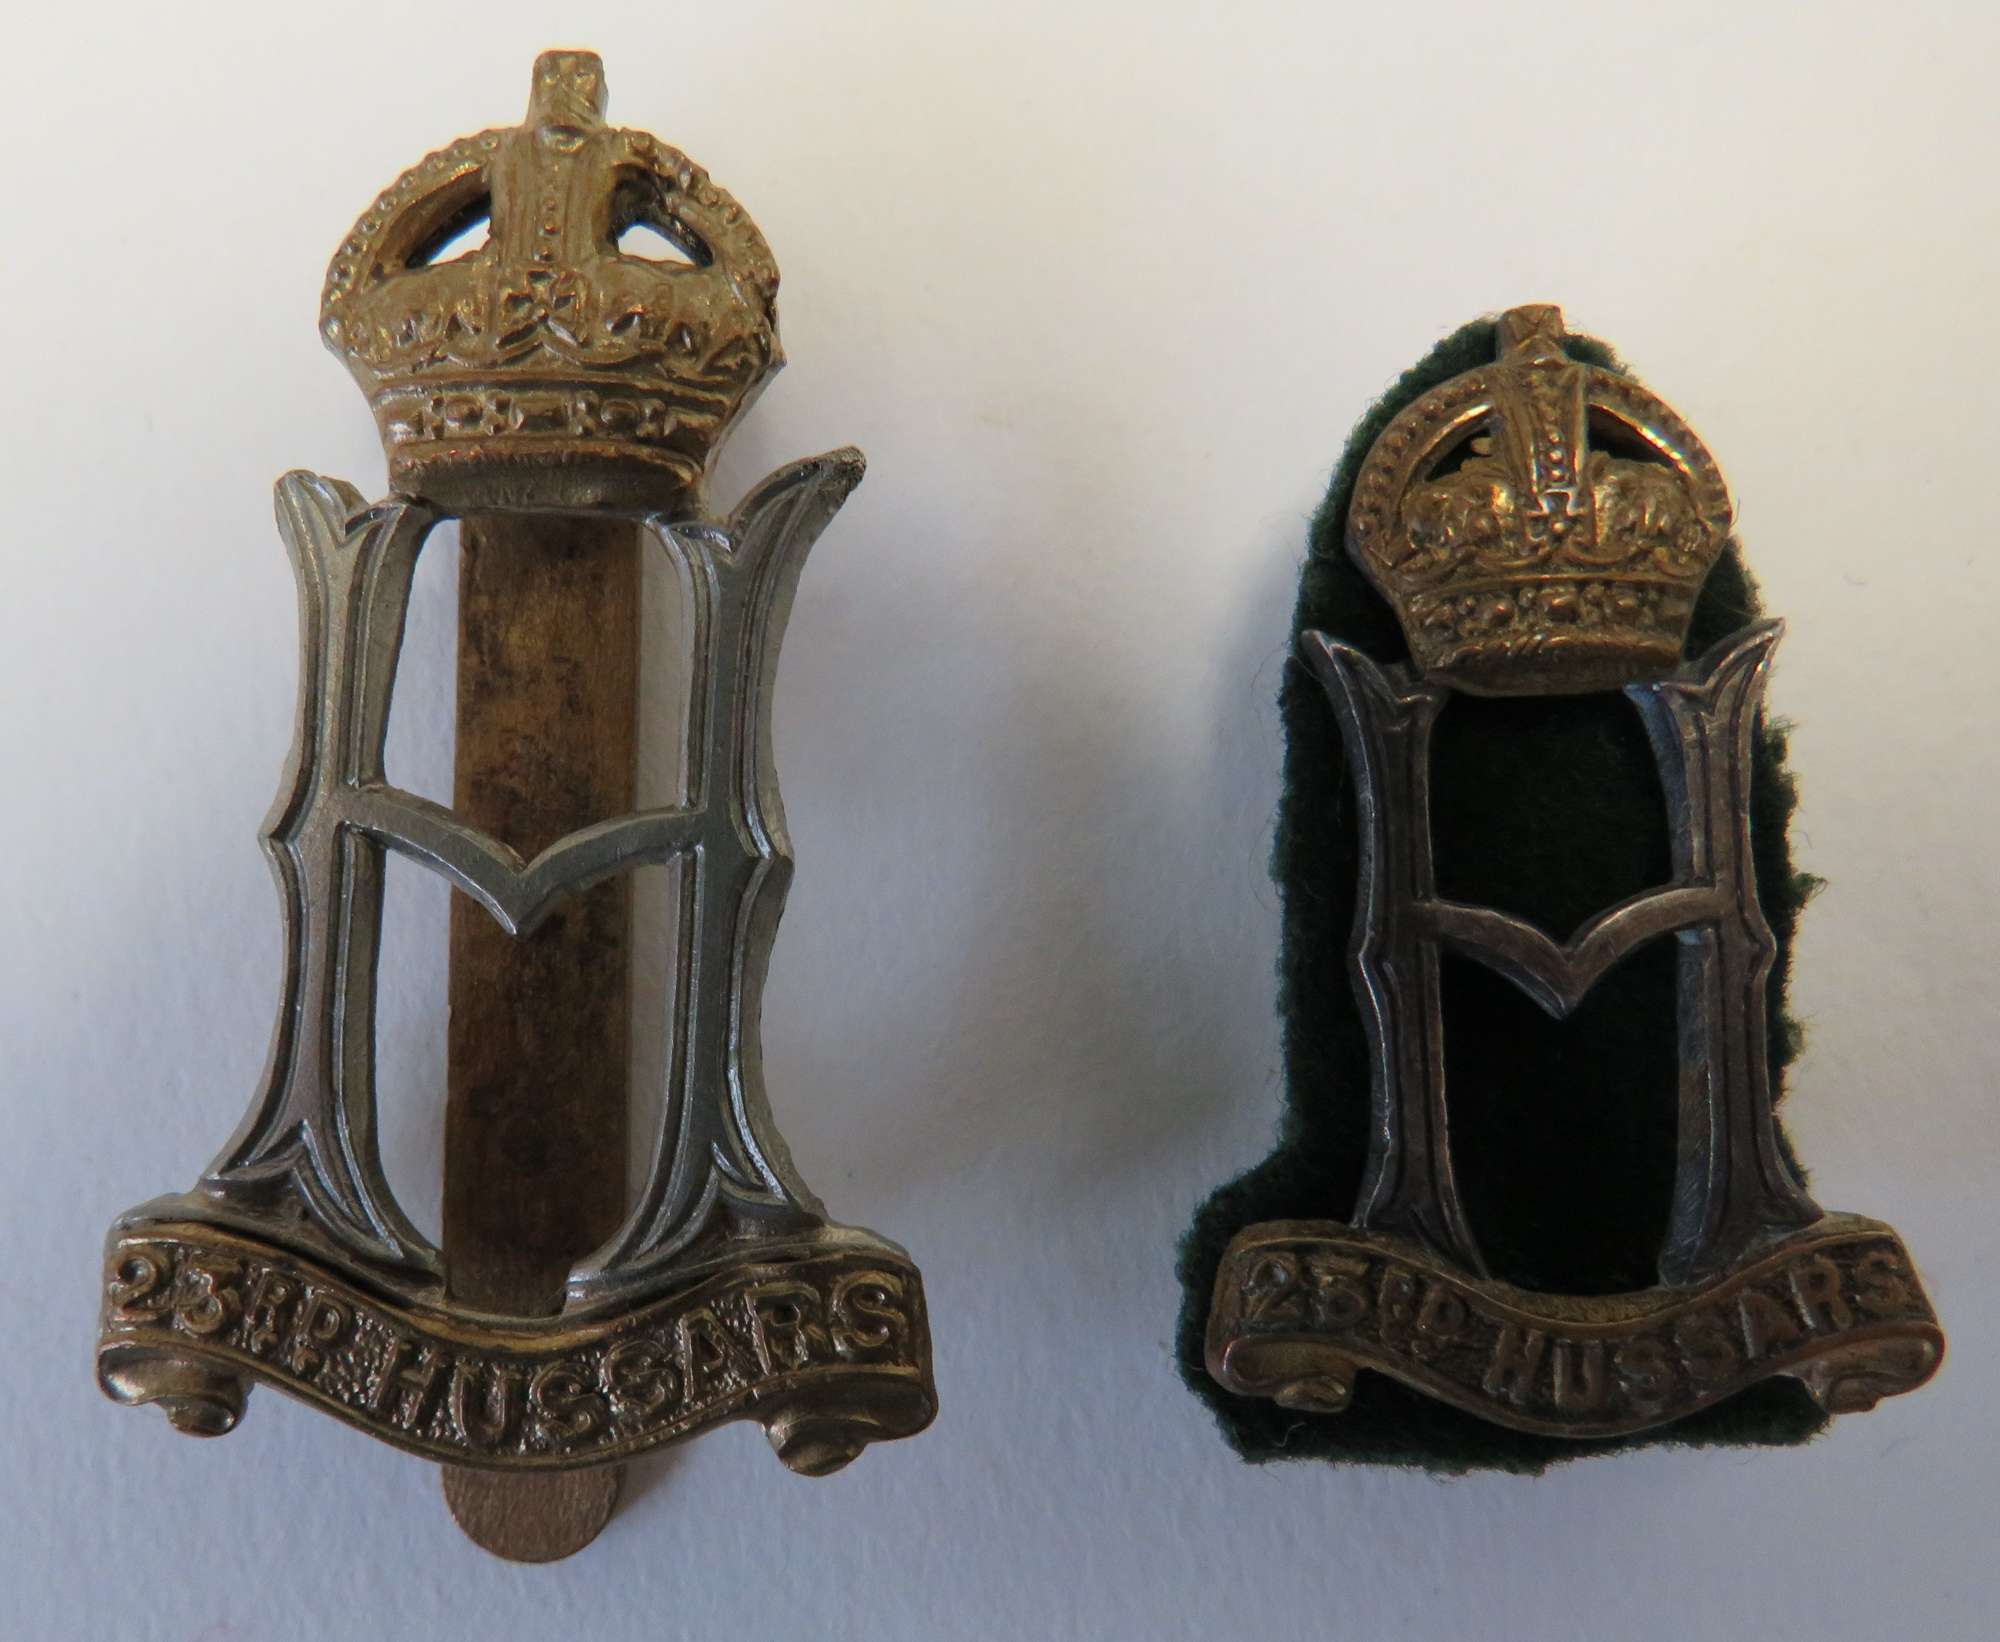 23rd Hussars Cap and Collar Badges